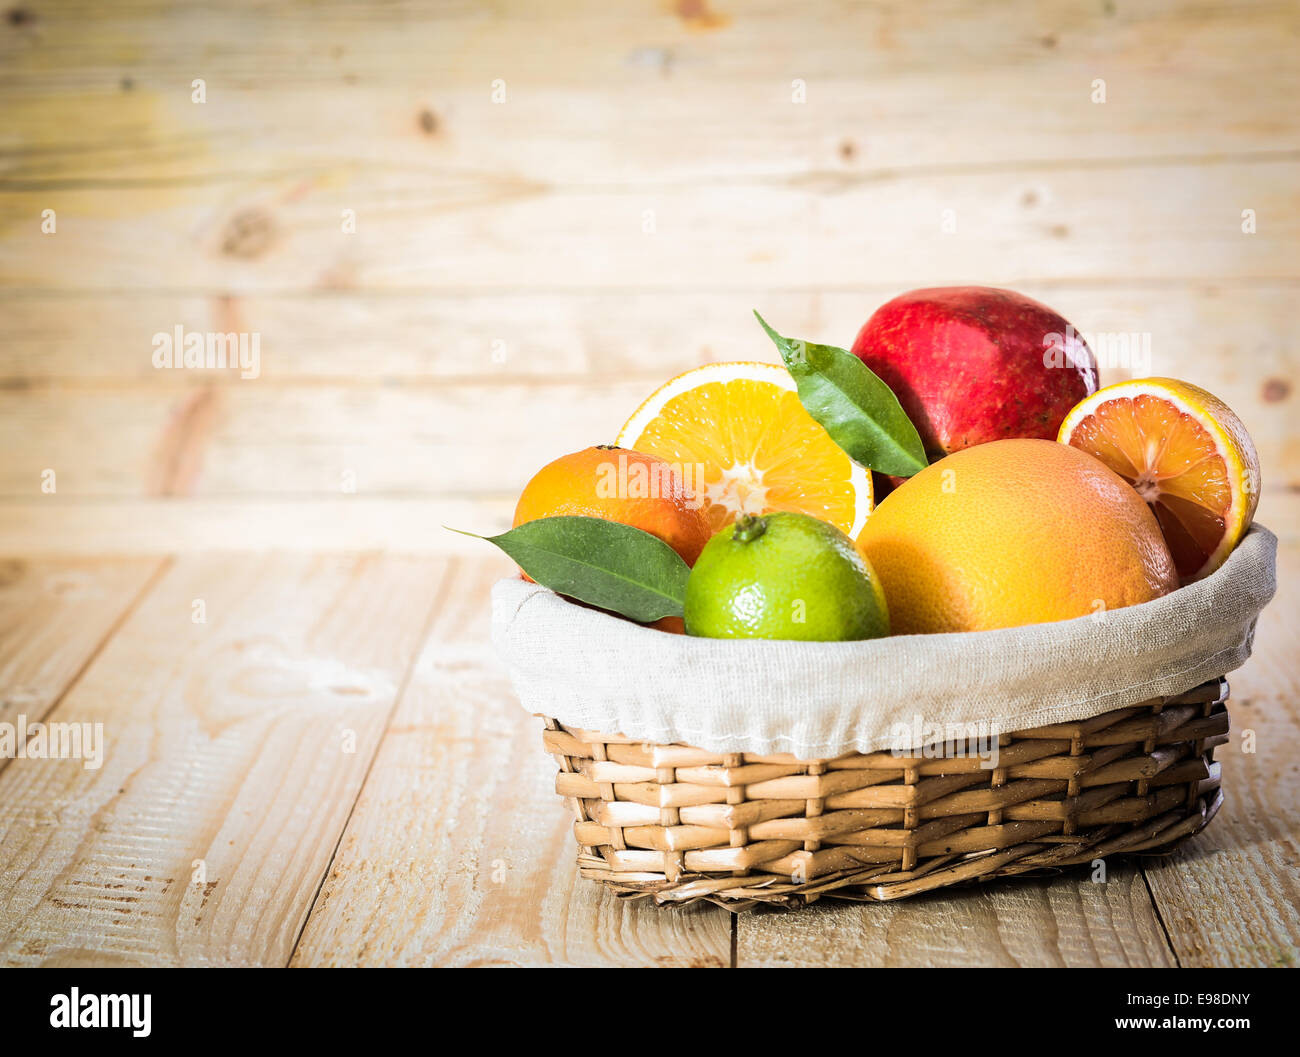 Colourful wicker basket of assorted tropical fruit with a lime, grapefruit, oranges and an apple in a country kitchen on wooden Stock Photo